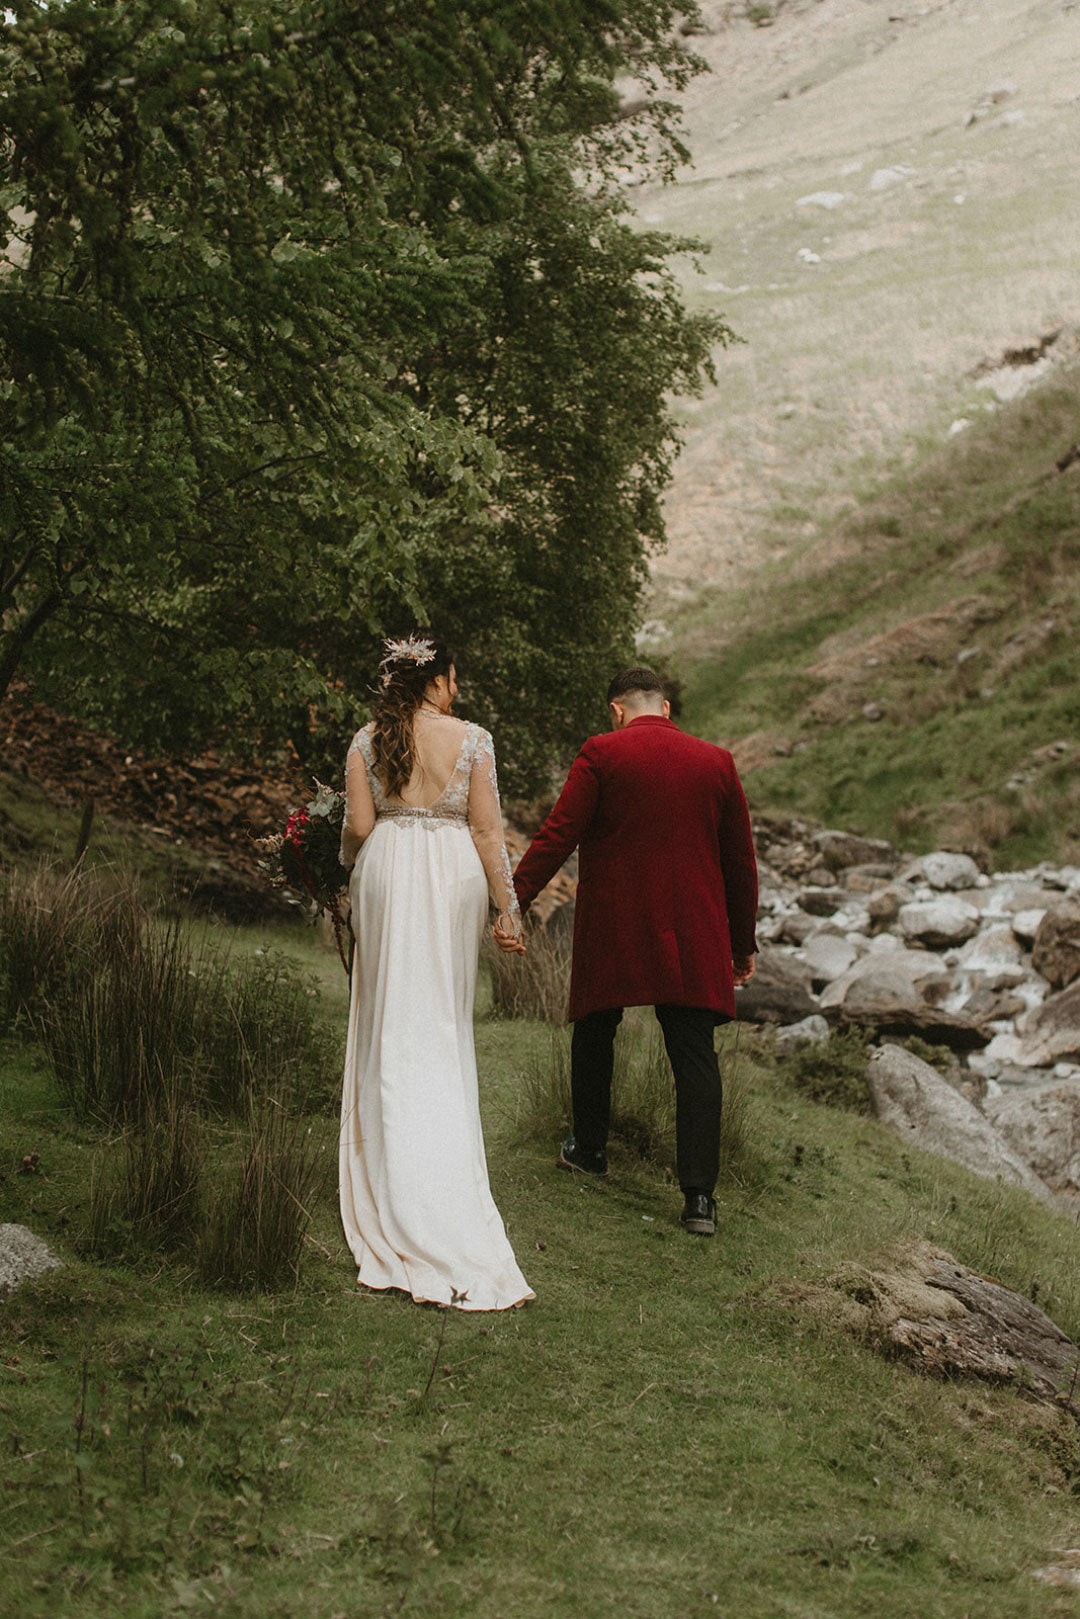 Bride and Groom walking in country landscape